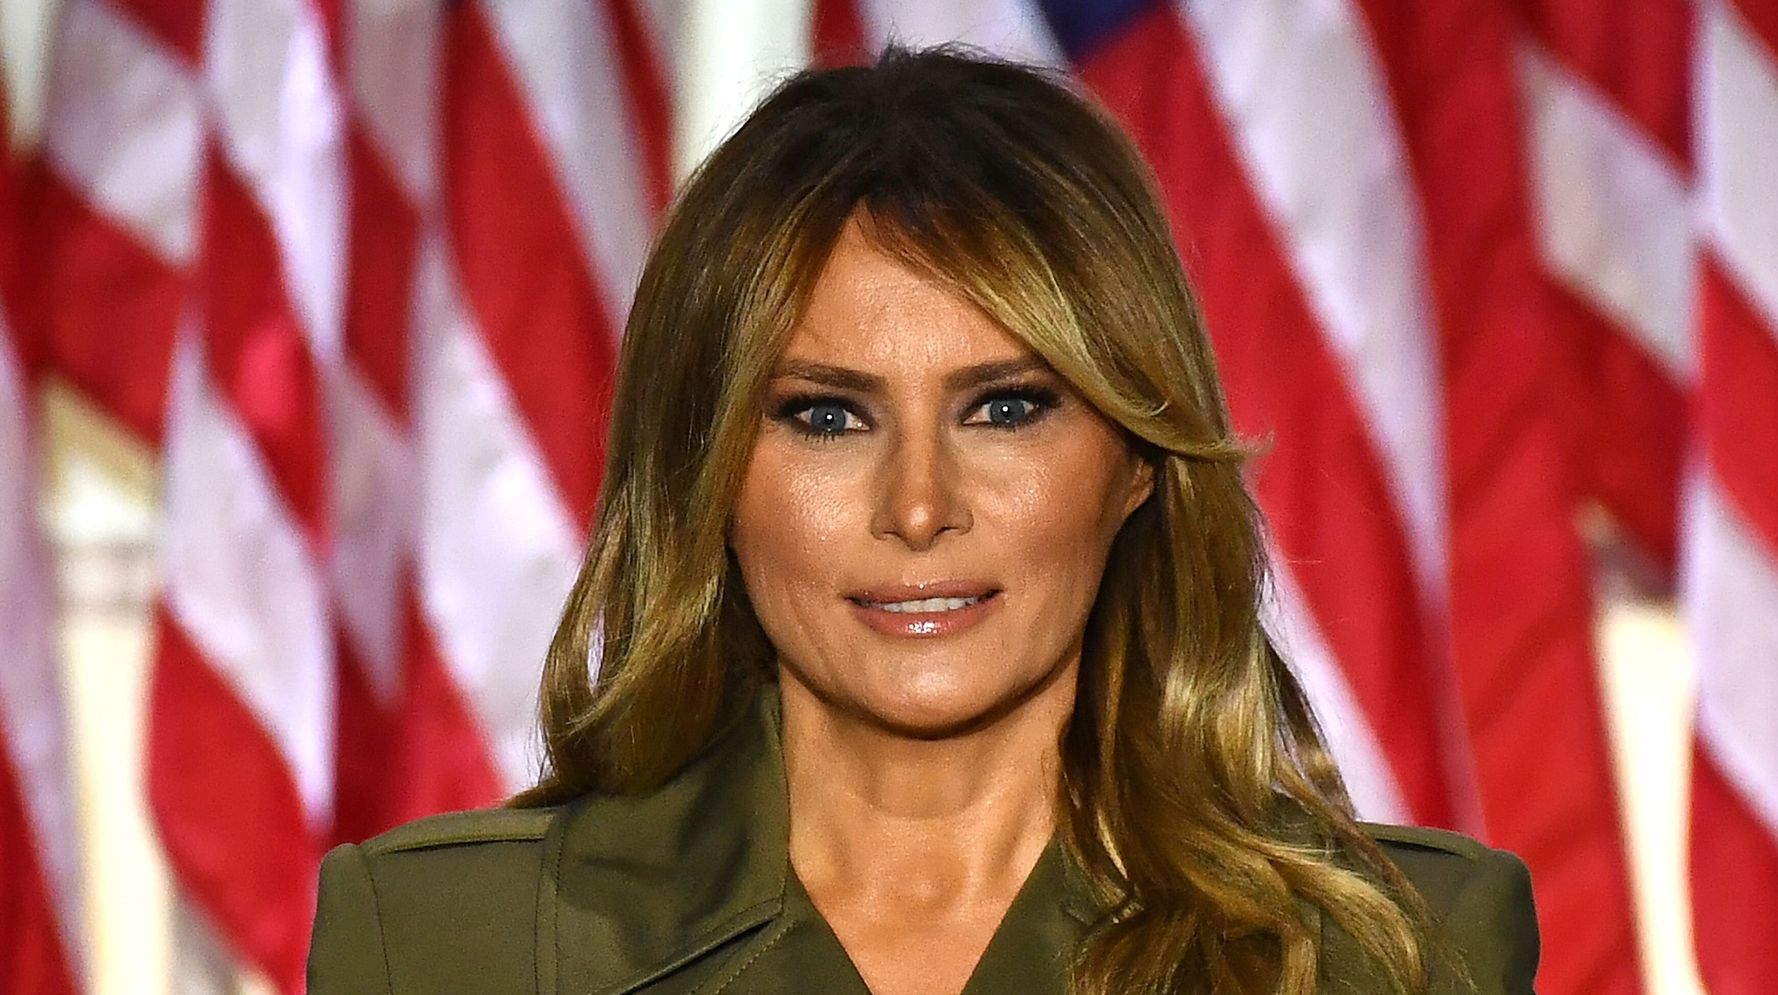 Melania Trump Hits Back At 'Dishonorable' Historian Over Rose Garden Criticism